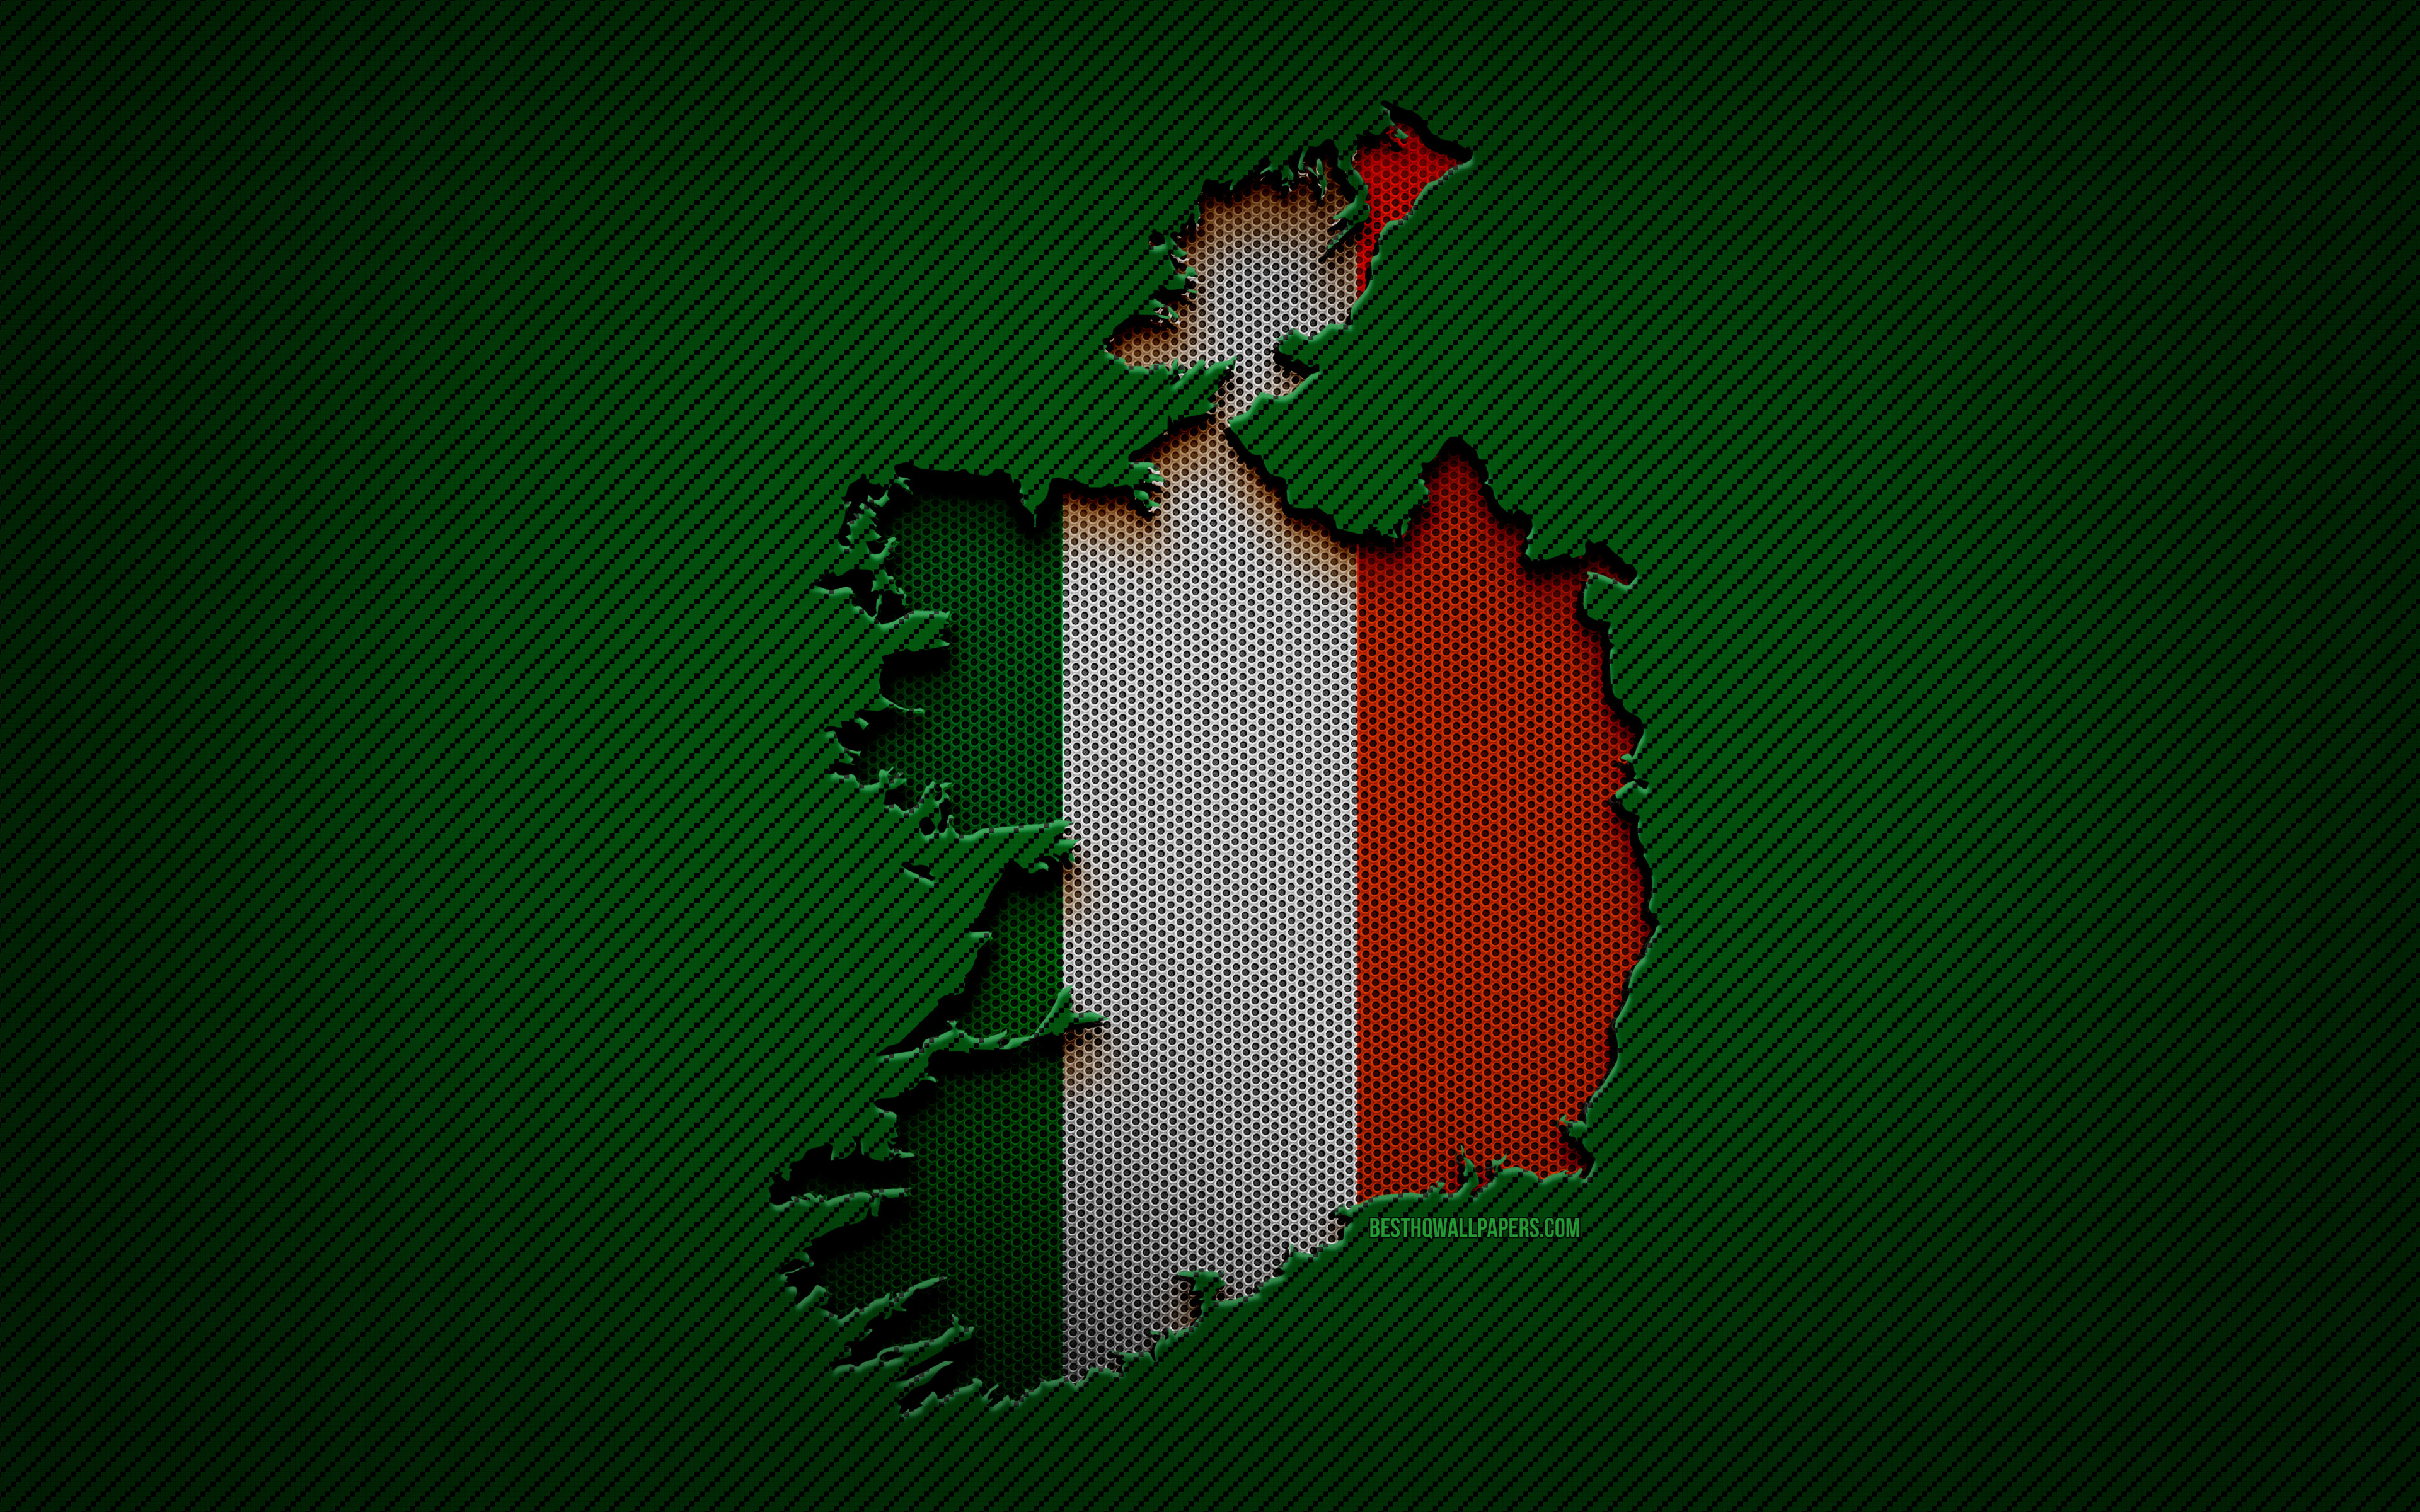 Download wallpaper Ireland map, 4k, European countries, Irish flag, green carbon background, Ireland map silhouette, Ireland flag, Europe, Irish map, Ireland, flag of Ireland for desktop with resolution 3840x2400. High Quality HD